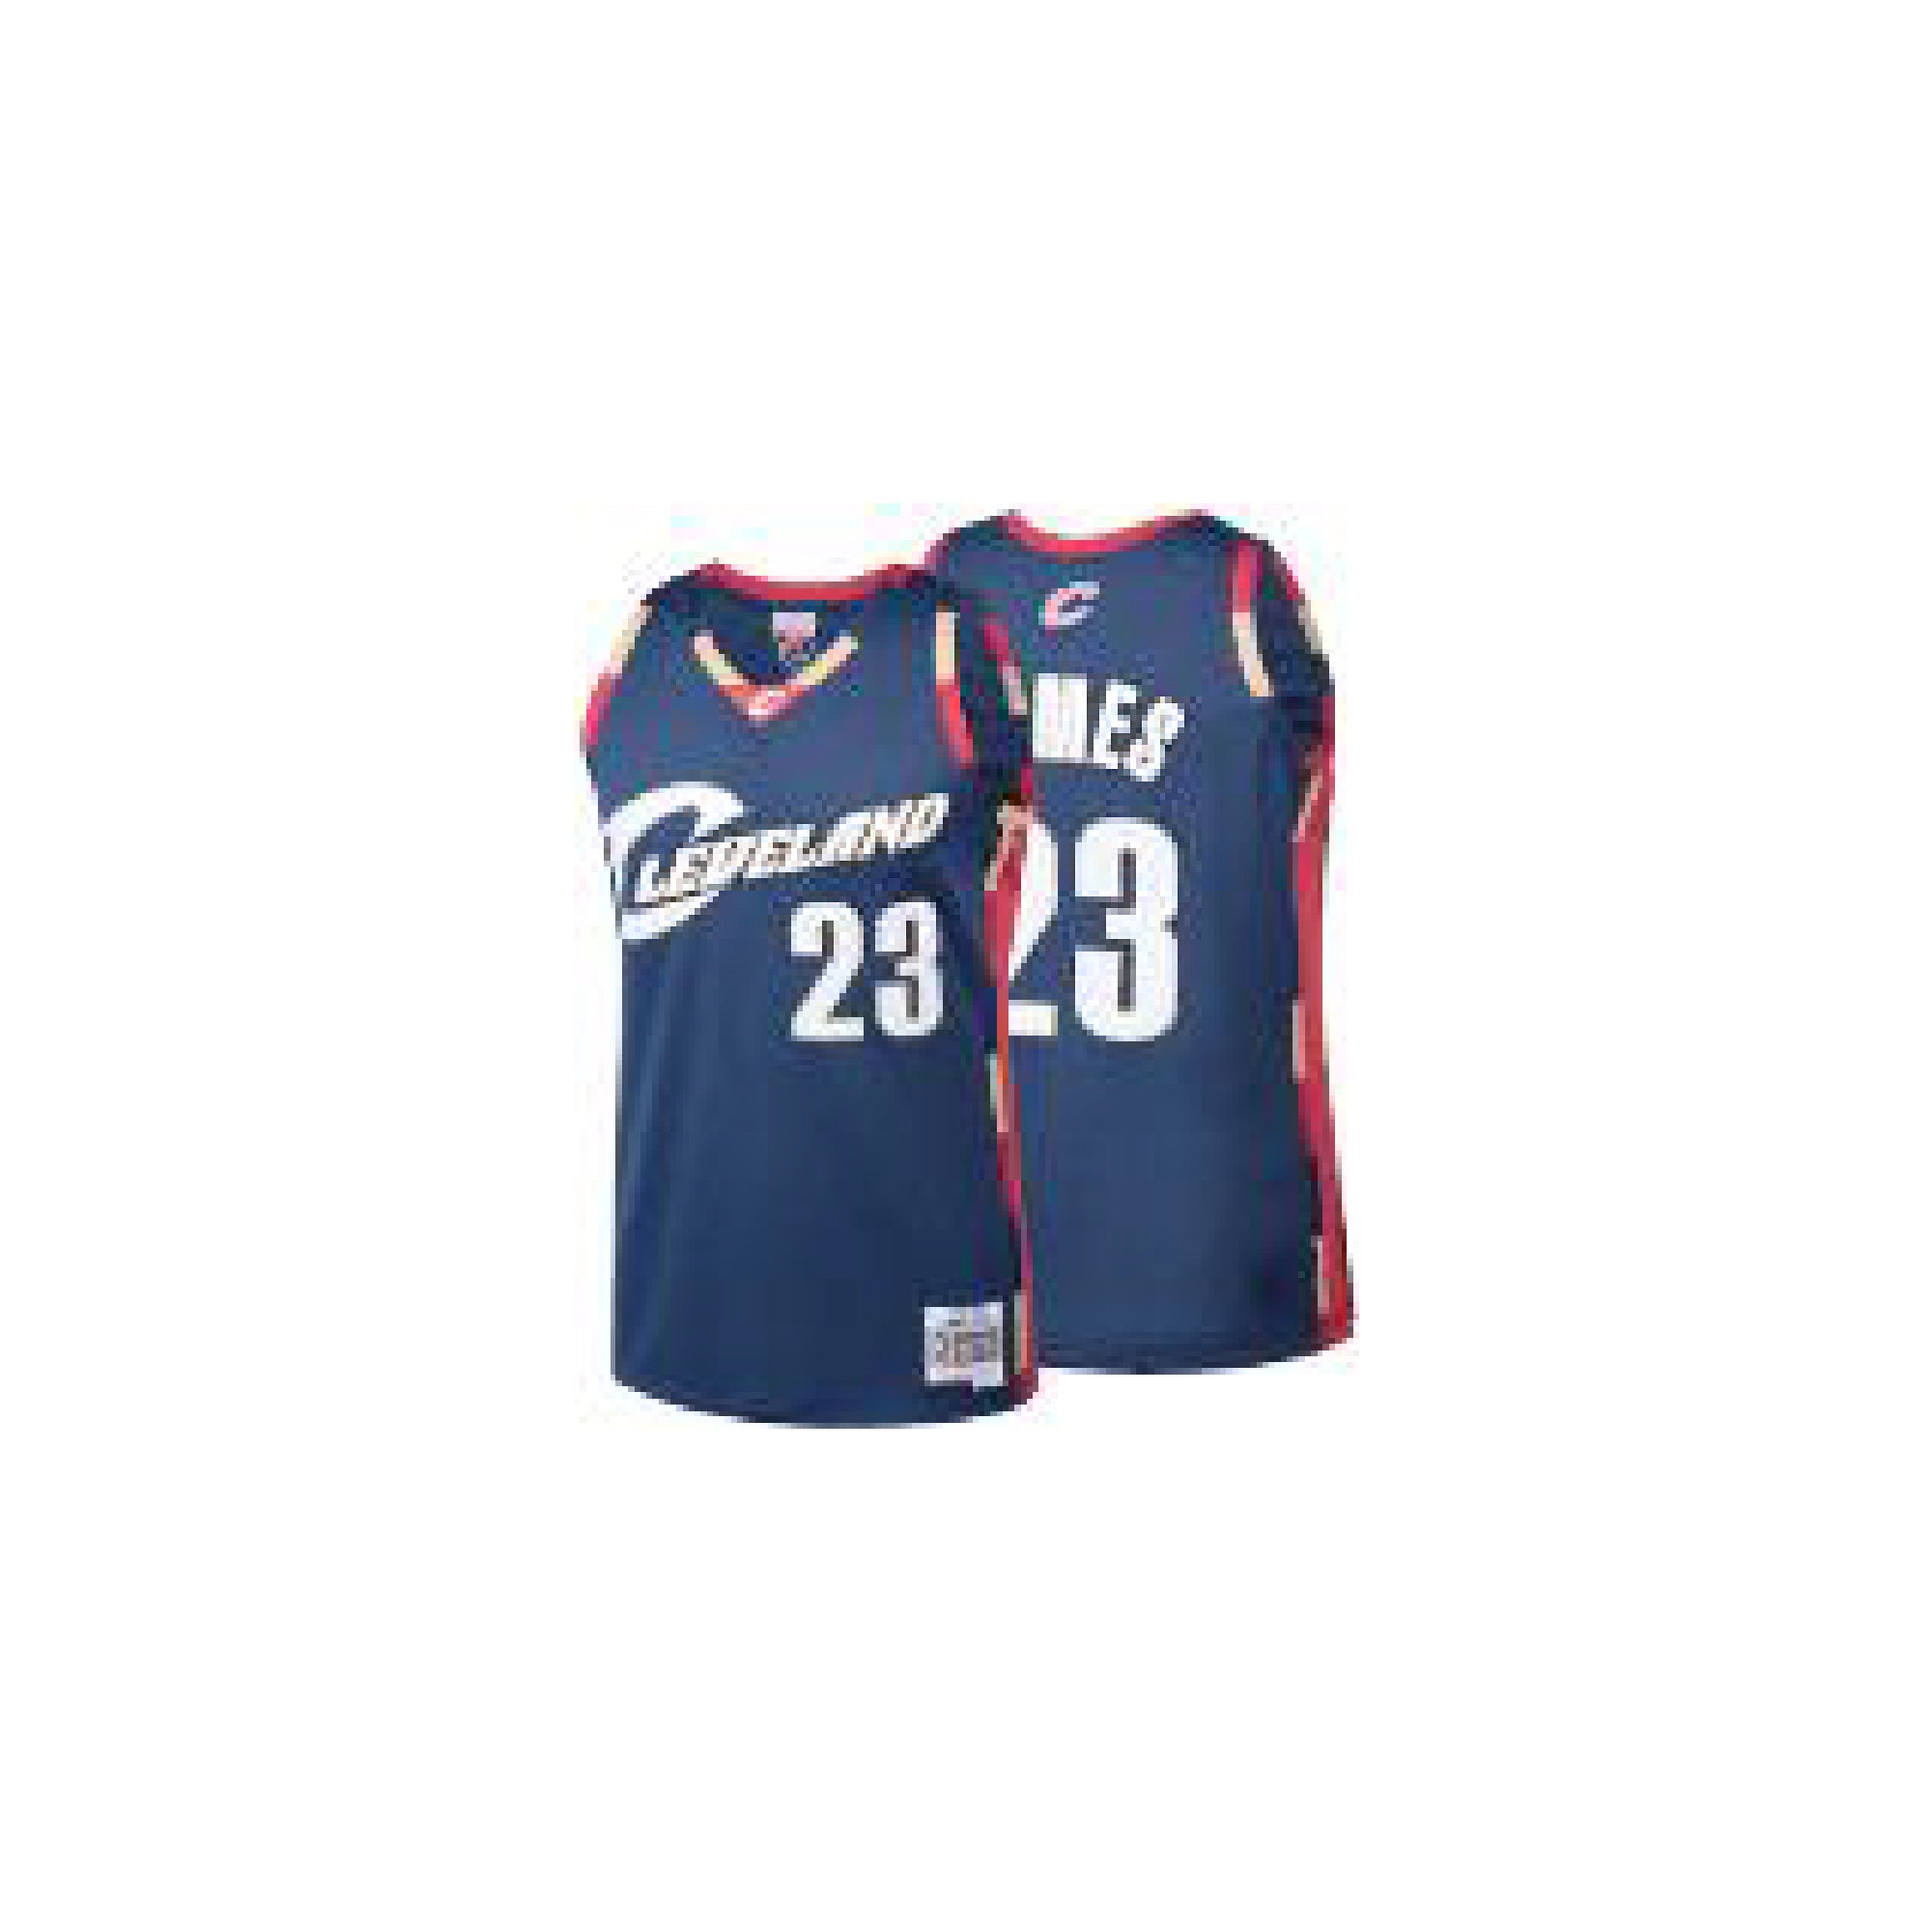  Mitchell & Ness Lebron James 2003-04 Authentic Jersey